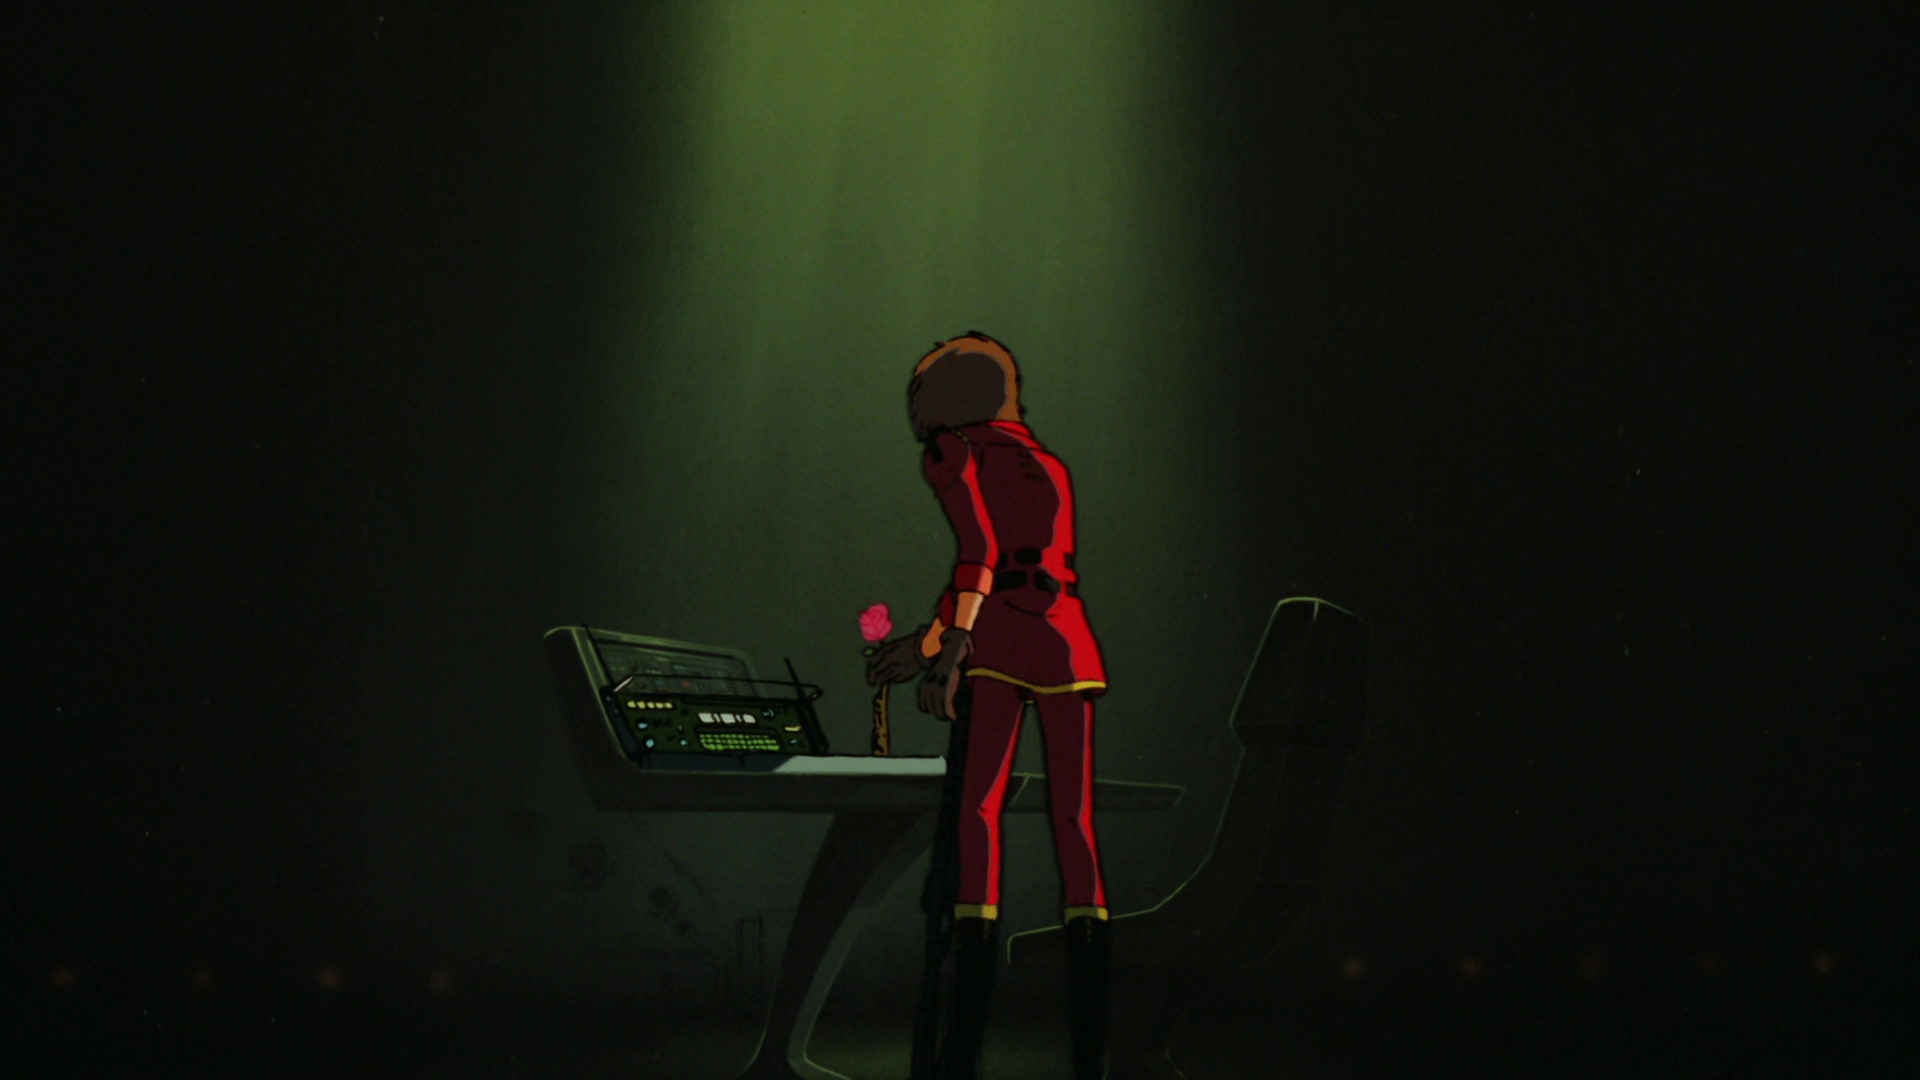 Harlock picking up the rose from Maya's radio desk as a light shines on him from above.